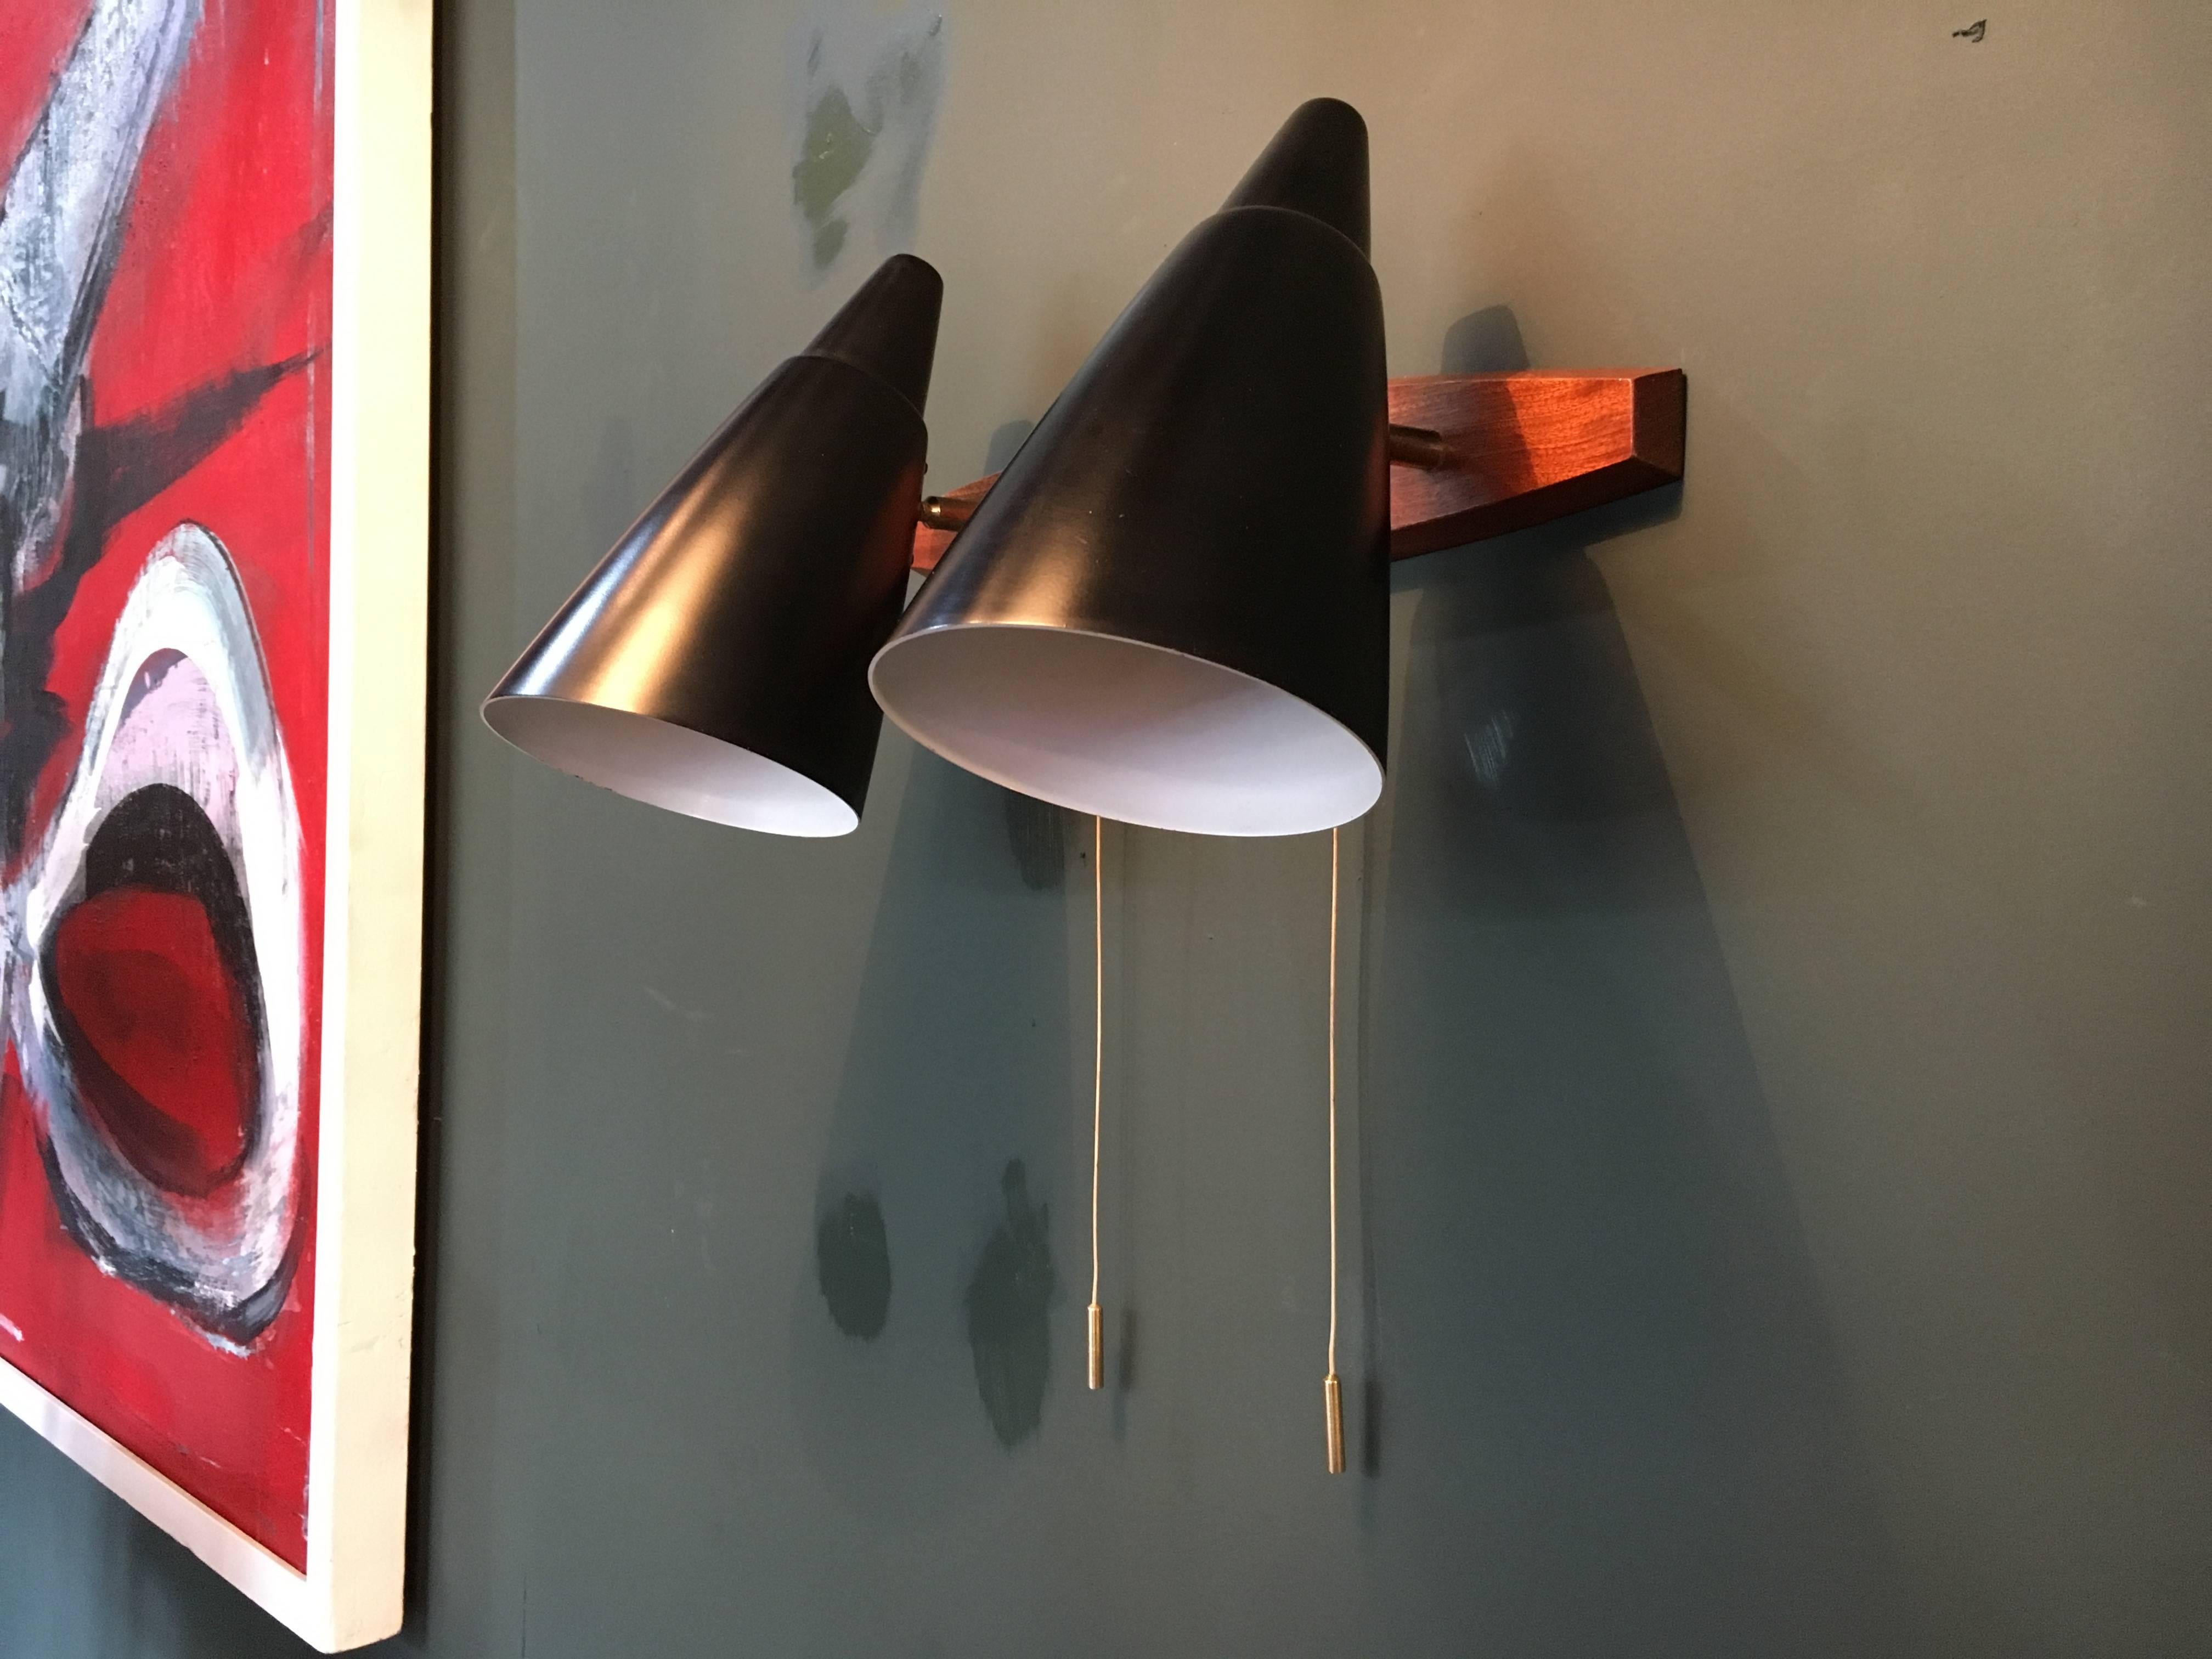 Dual cone midcentury Italian wall lights, dating from the 1950s. These lights are multi-directional and can be individually lit. Satin-matte black cones with white interior on teak wall mount with brass fittings. In superb condition and fully